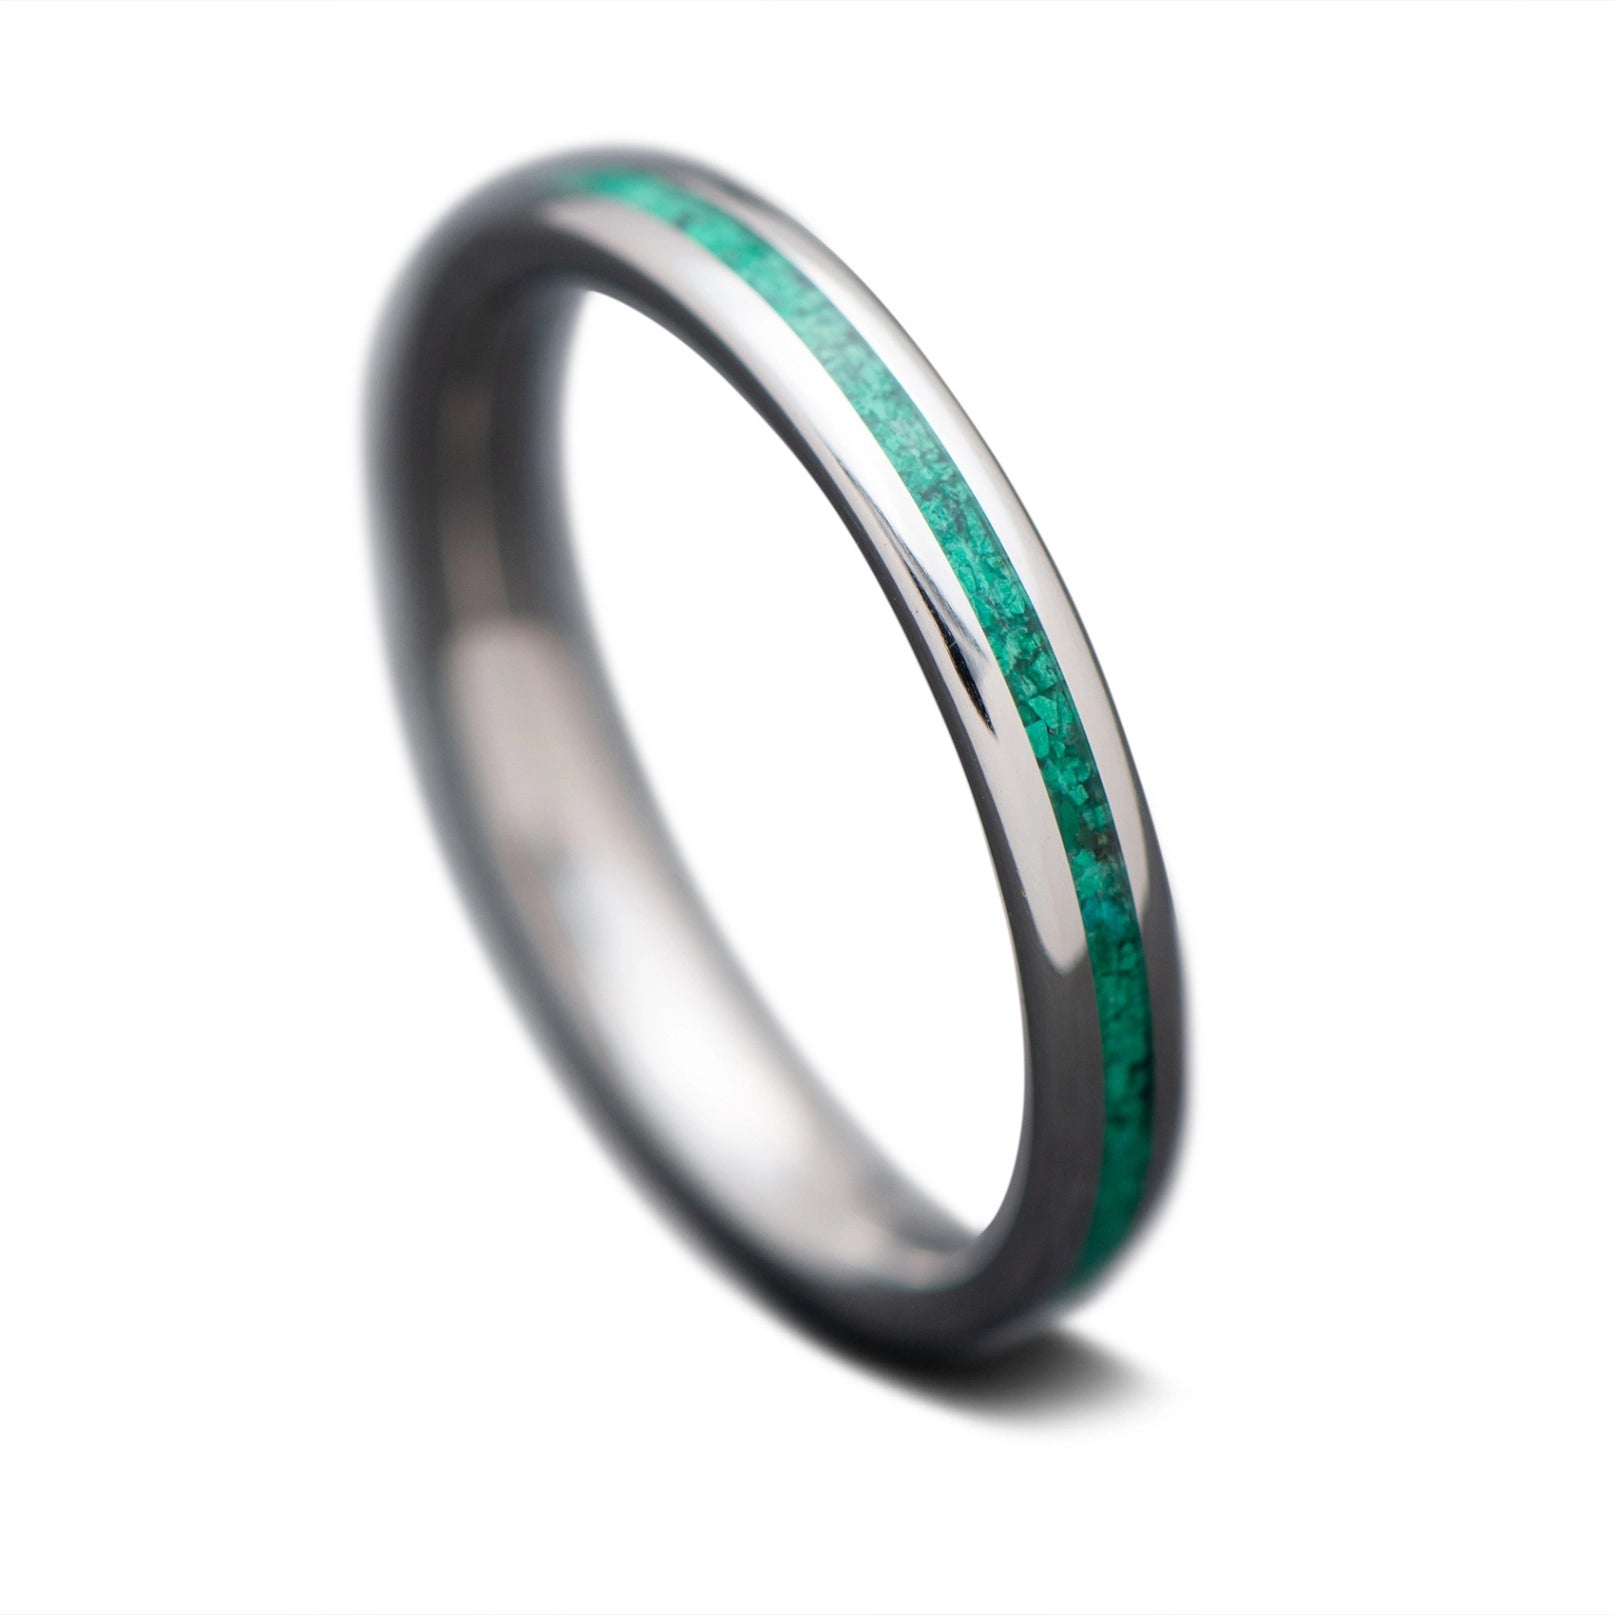 Titanium core ring with Malachite inlay, 3mm -THE ANCHOR